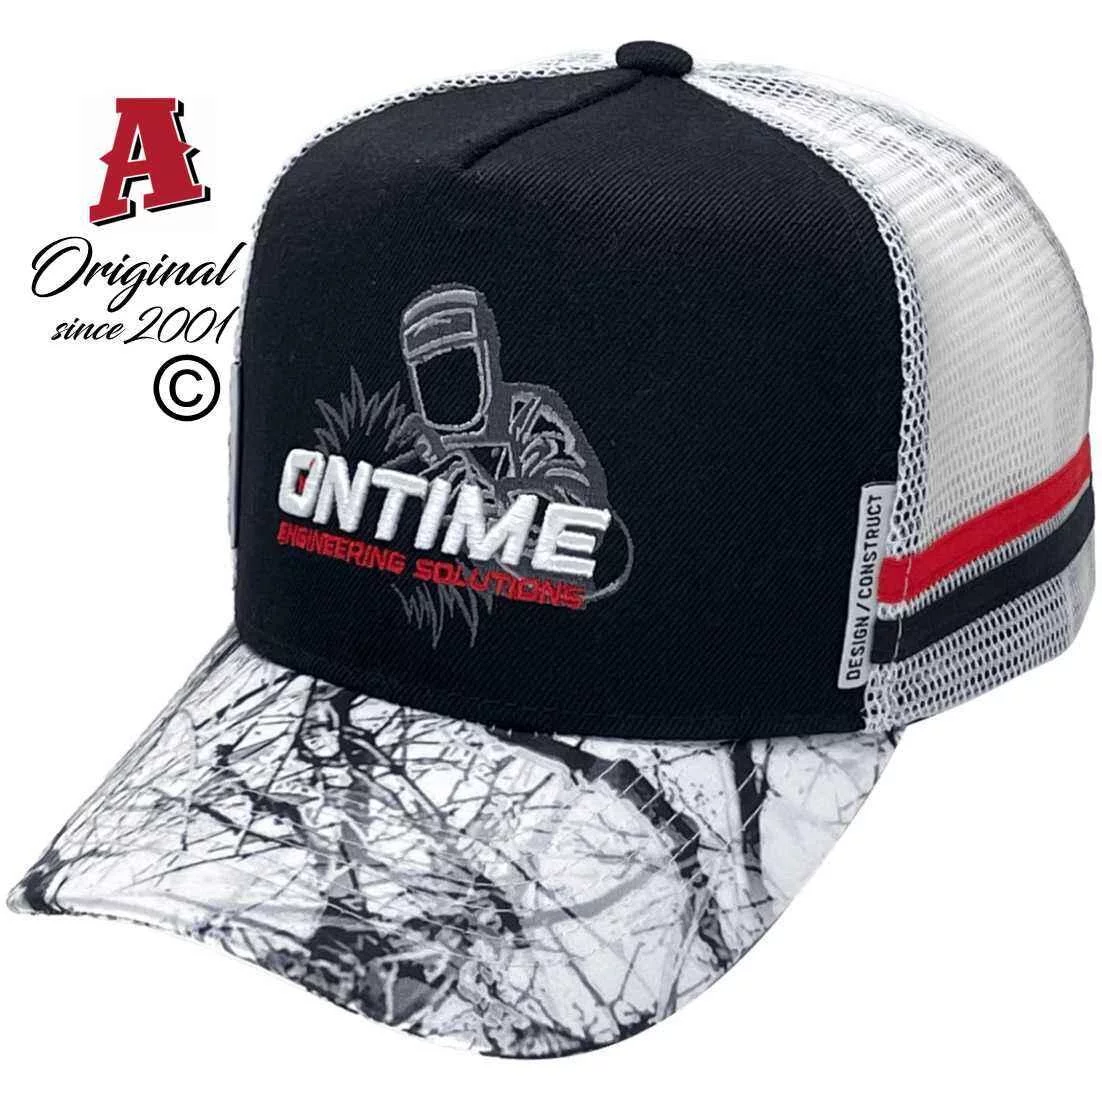 Ontime Engineering Solutions Mudgee NSW Power Aussie Trucker Hats with 3d Configurator Design Your Own Snow Tree Camo Sublimation